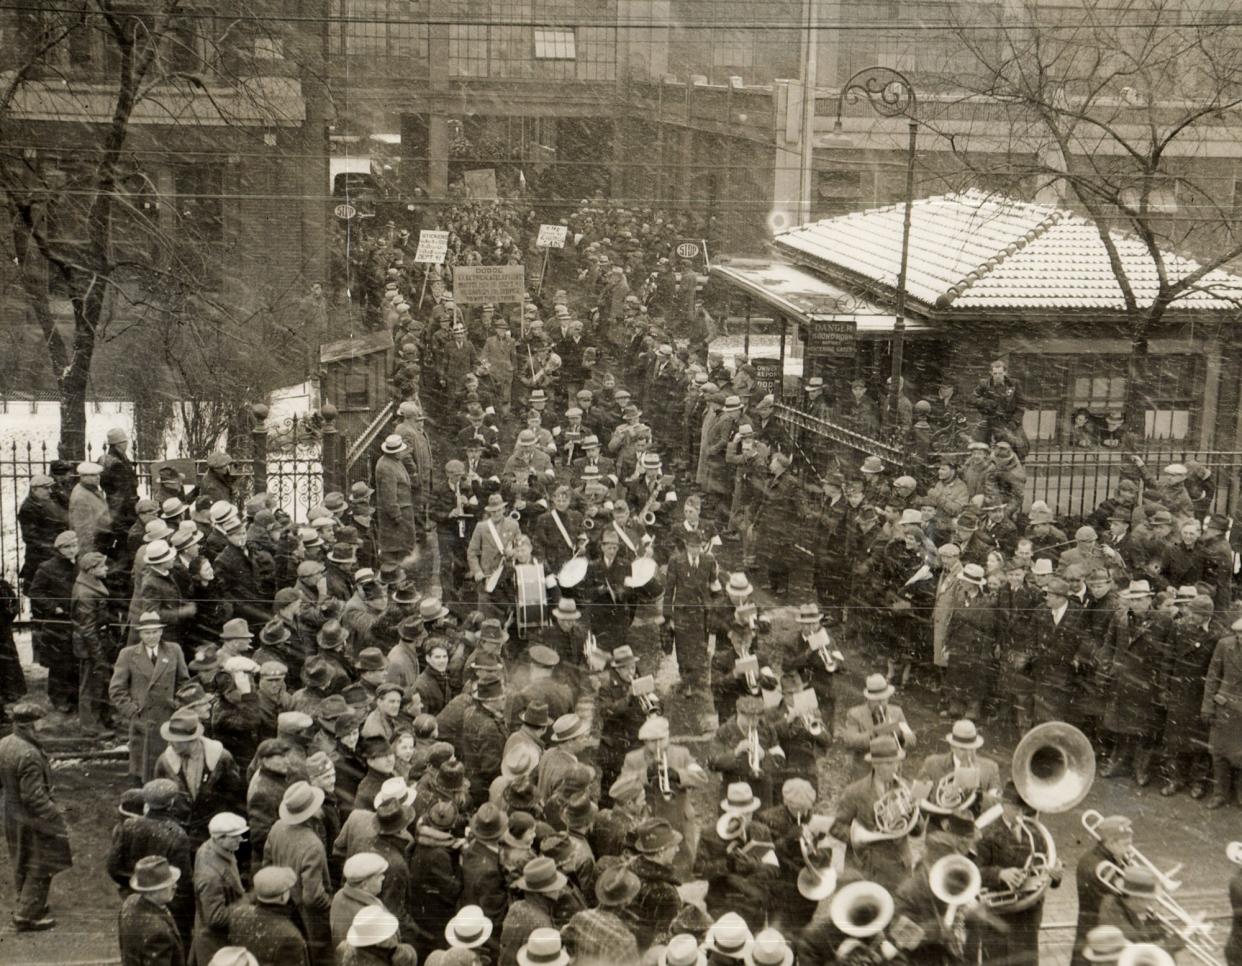 UAW workers parade out of the Dodge Main plant in Hamtramck behind the color guard and blaring brass band in March 1937, at the end of a long and bitter strike.